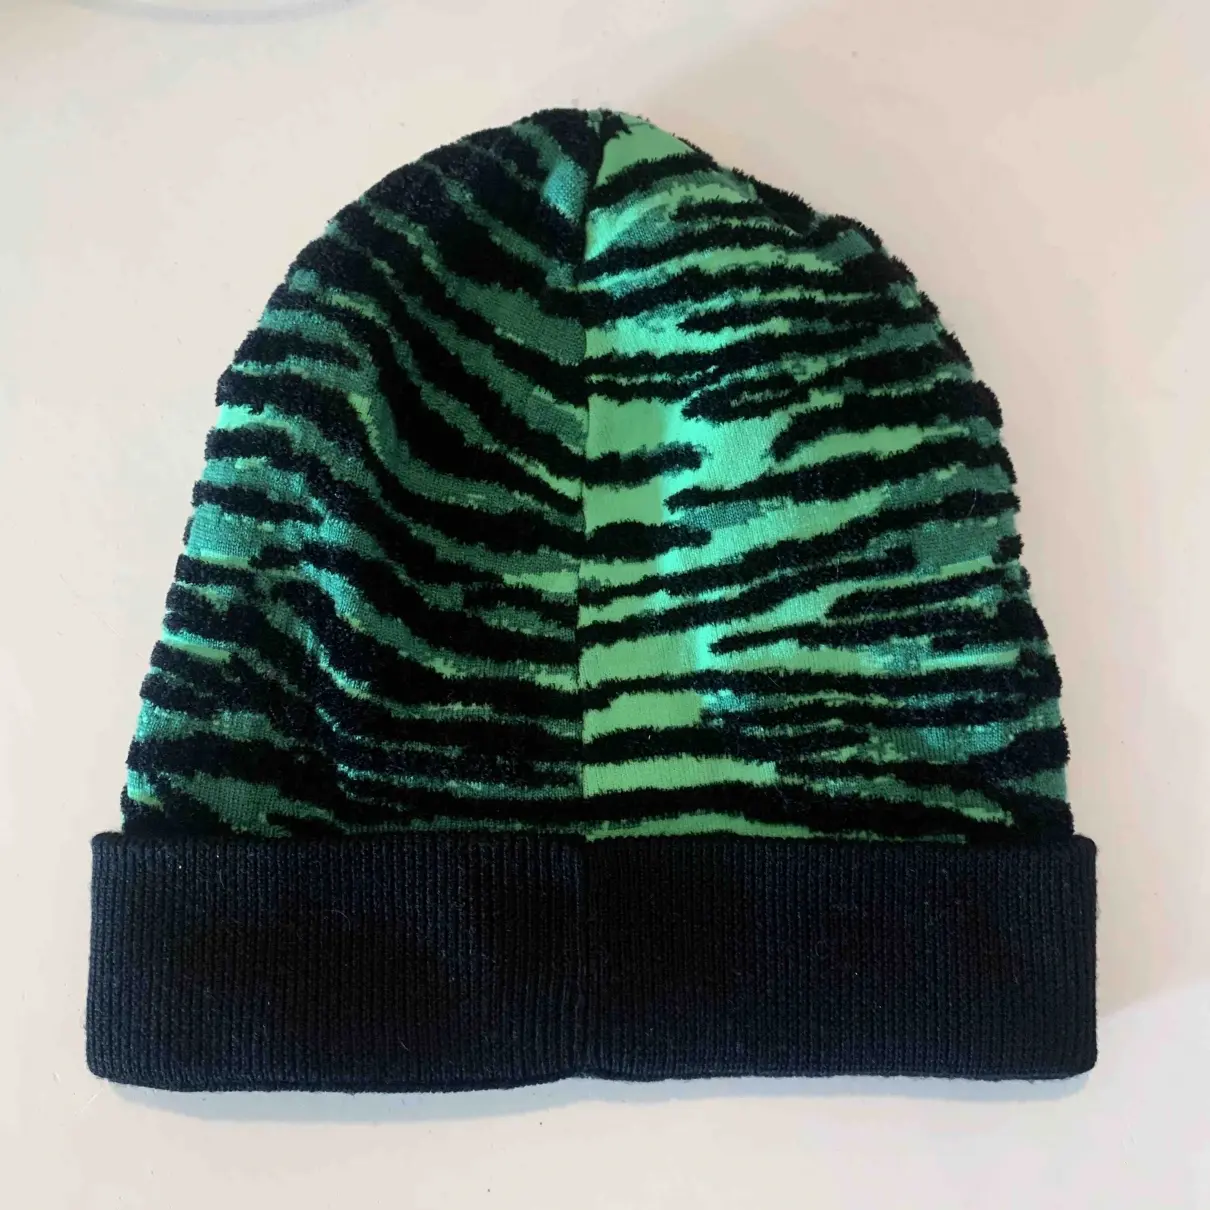 Kenzo x H&M Wool hat for sale